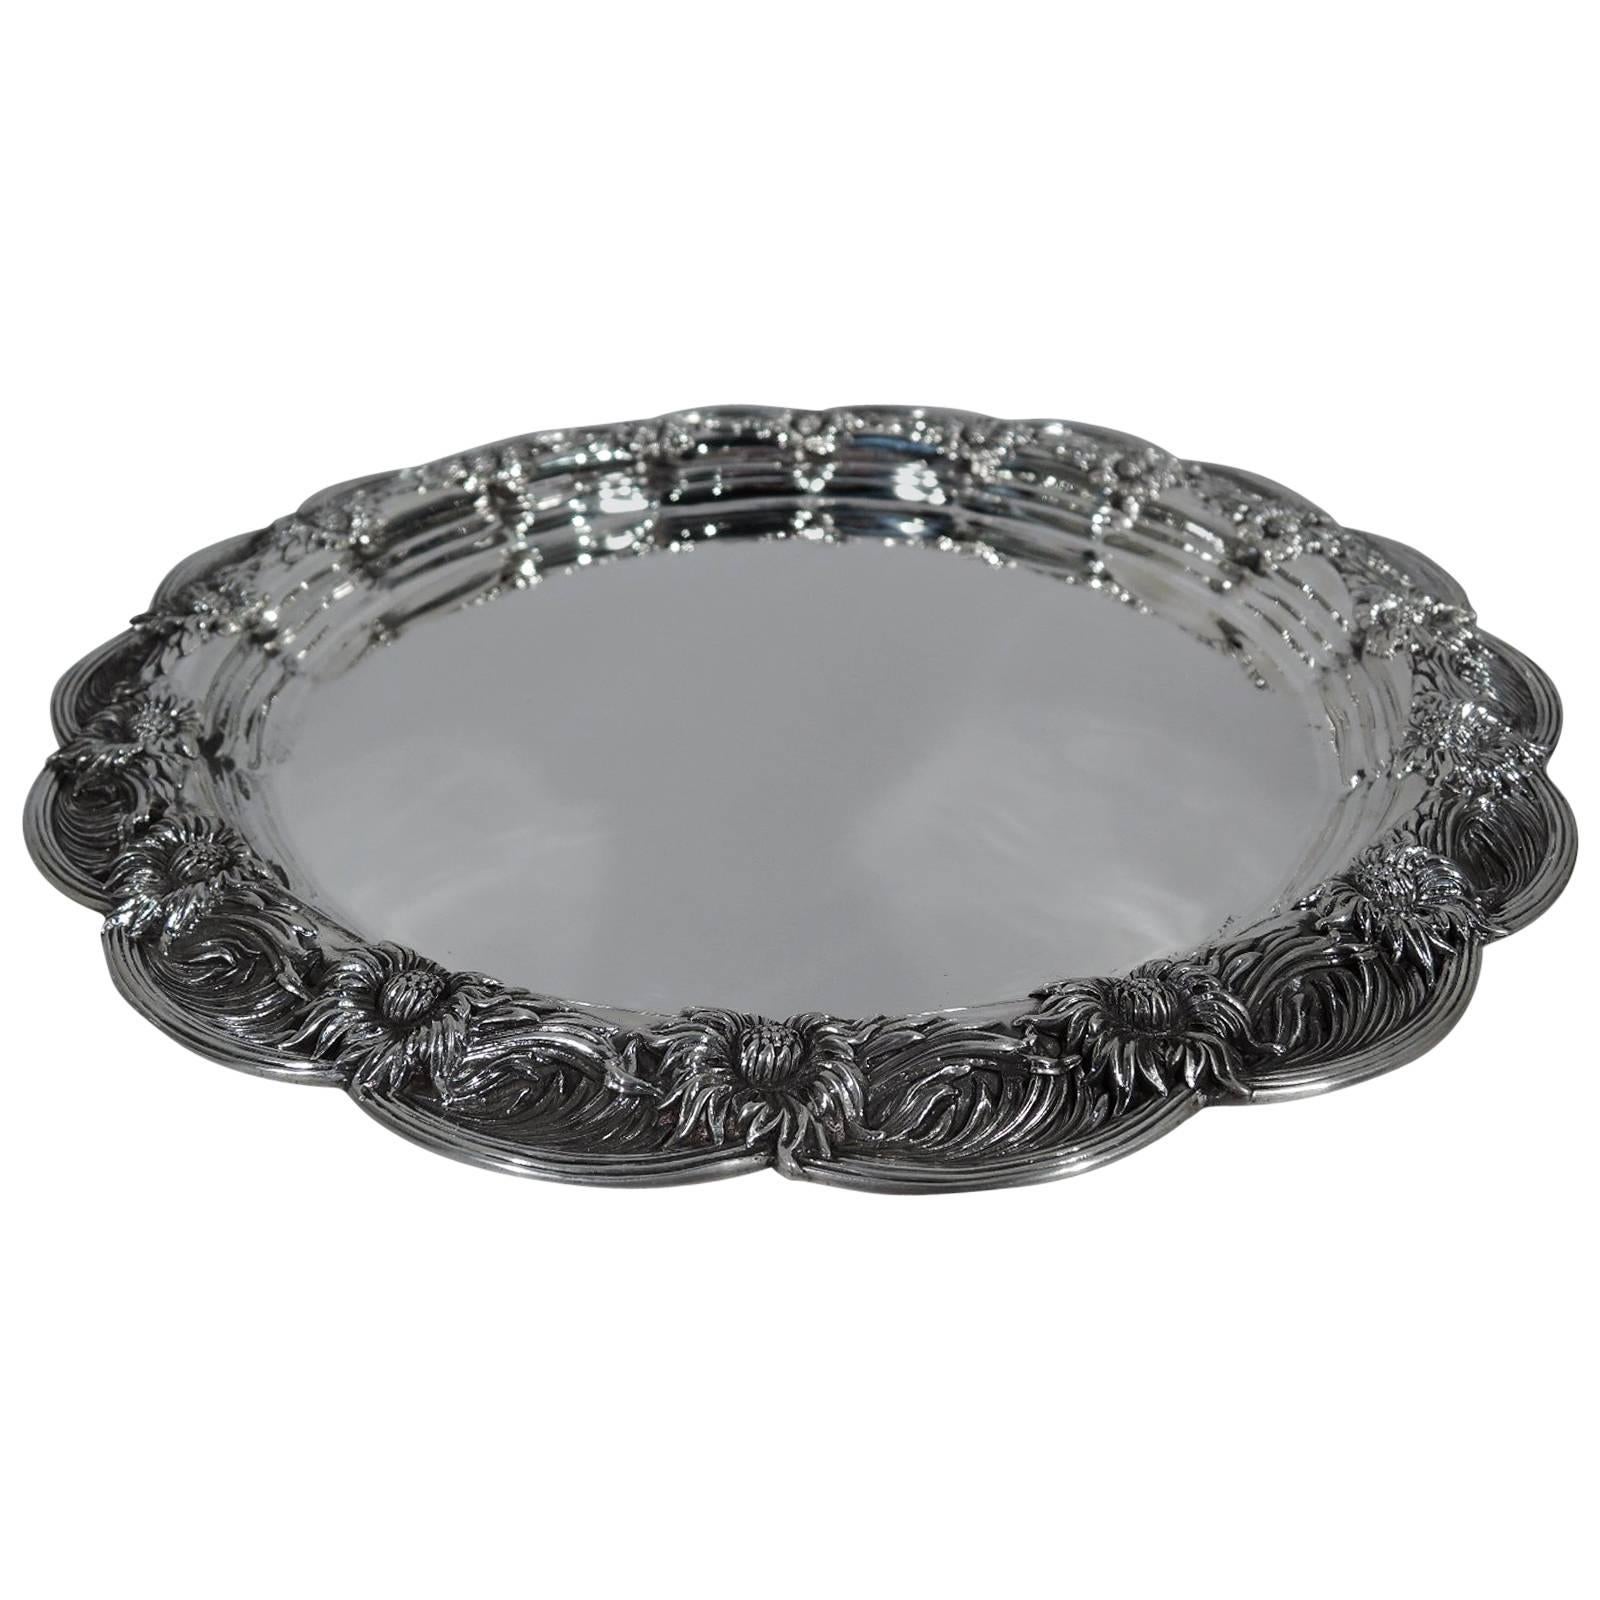 Antique Japonesque Chrysanthemum Sterling Silver Tray by Tiffany